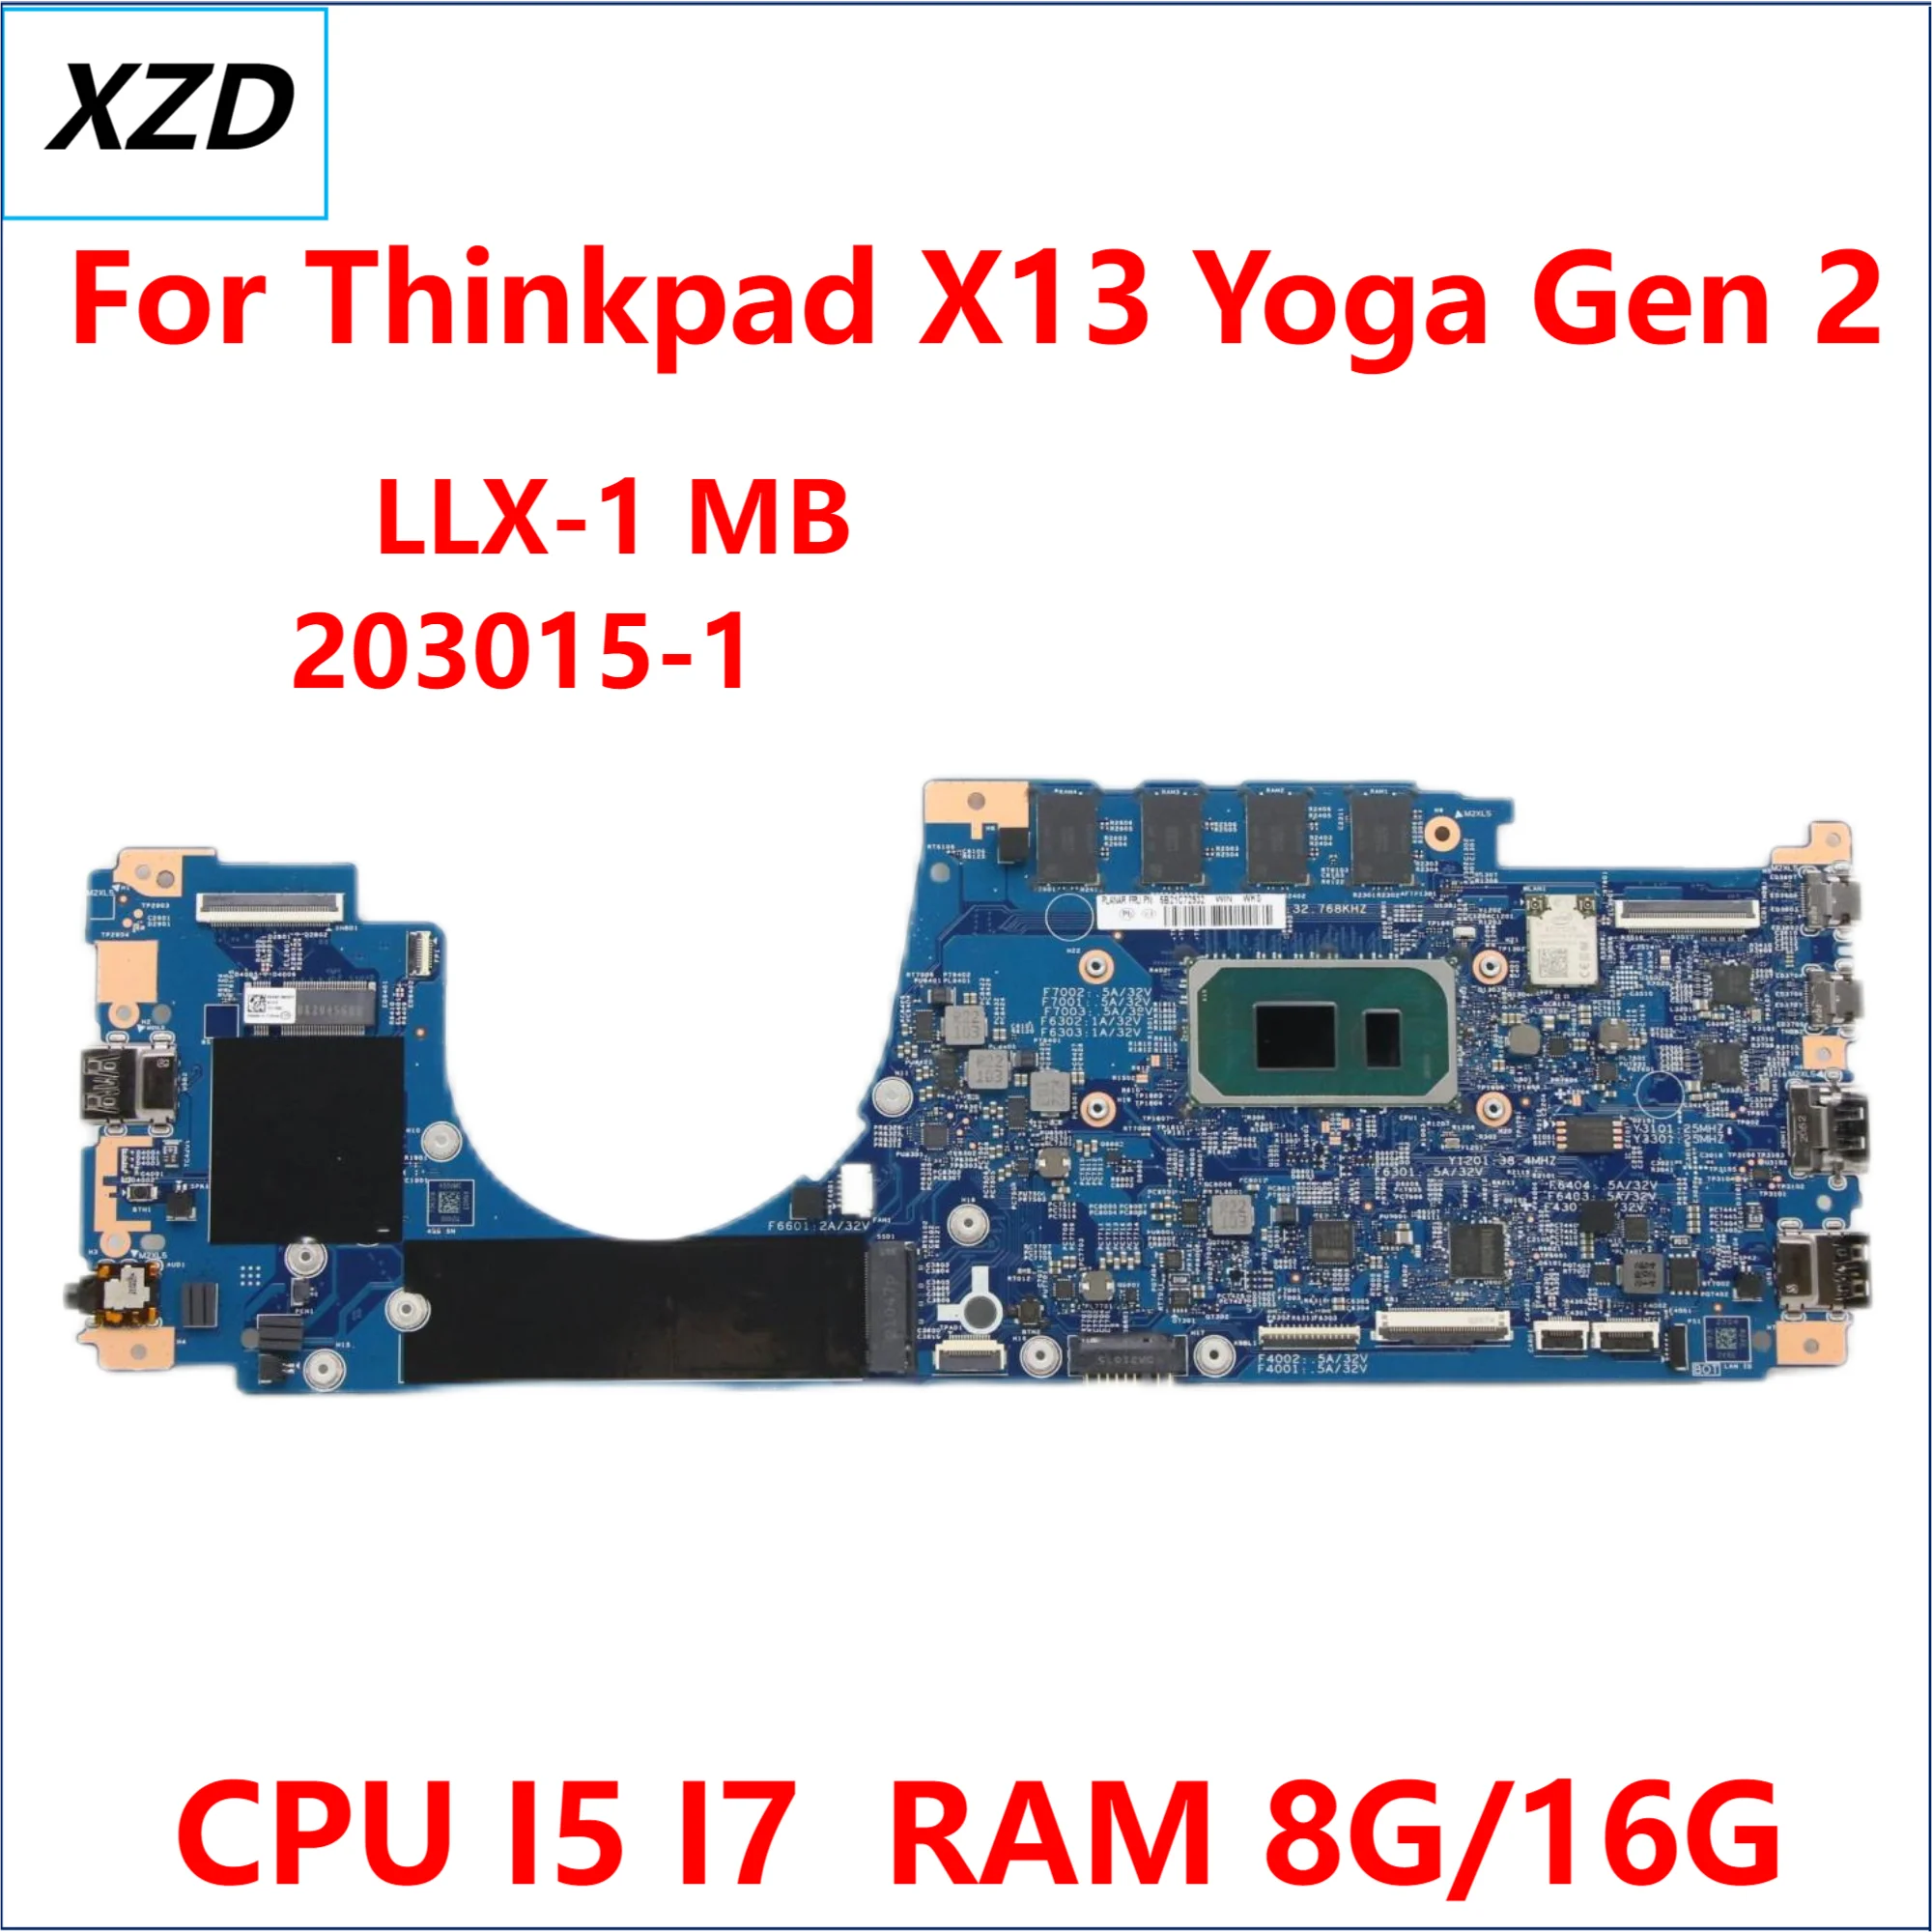 

LLX-1 MB 203015-1 Mainboard For Lenovo Thinkpad X13 Yoga Gen 2 Laptop Motherboard With i3/I5/I7 CPU RAM 32G/16G 100% TESE